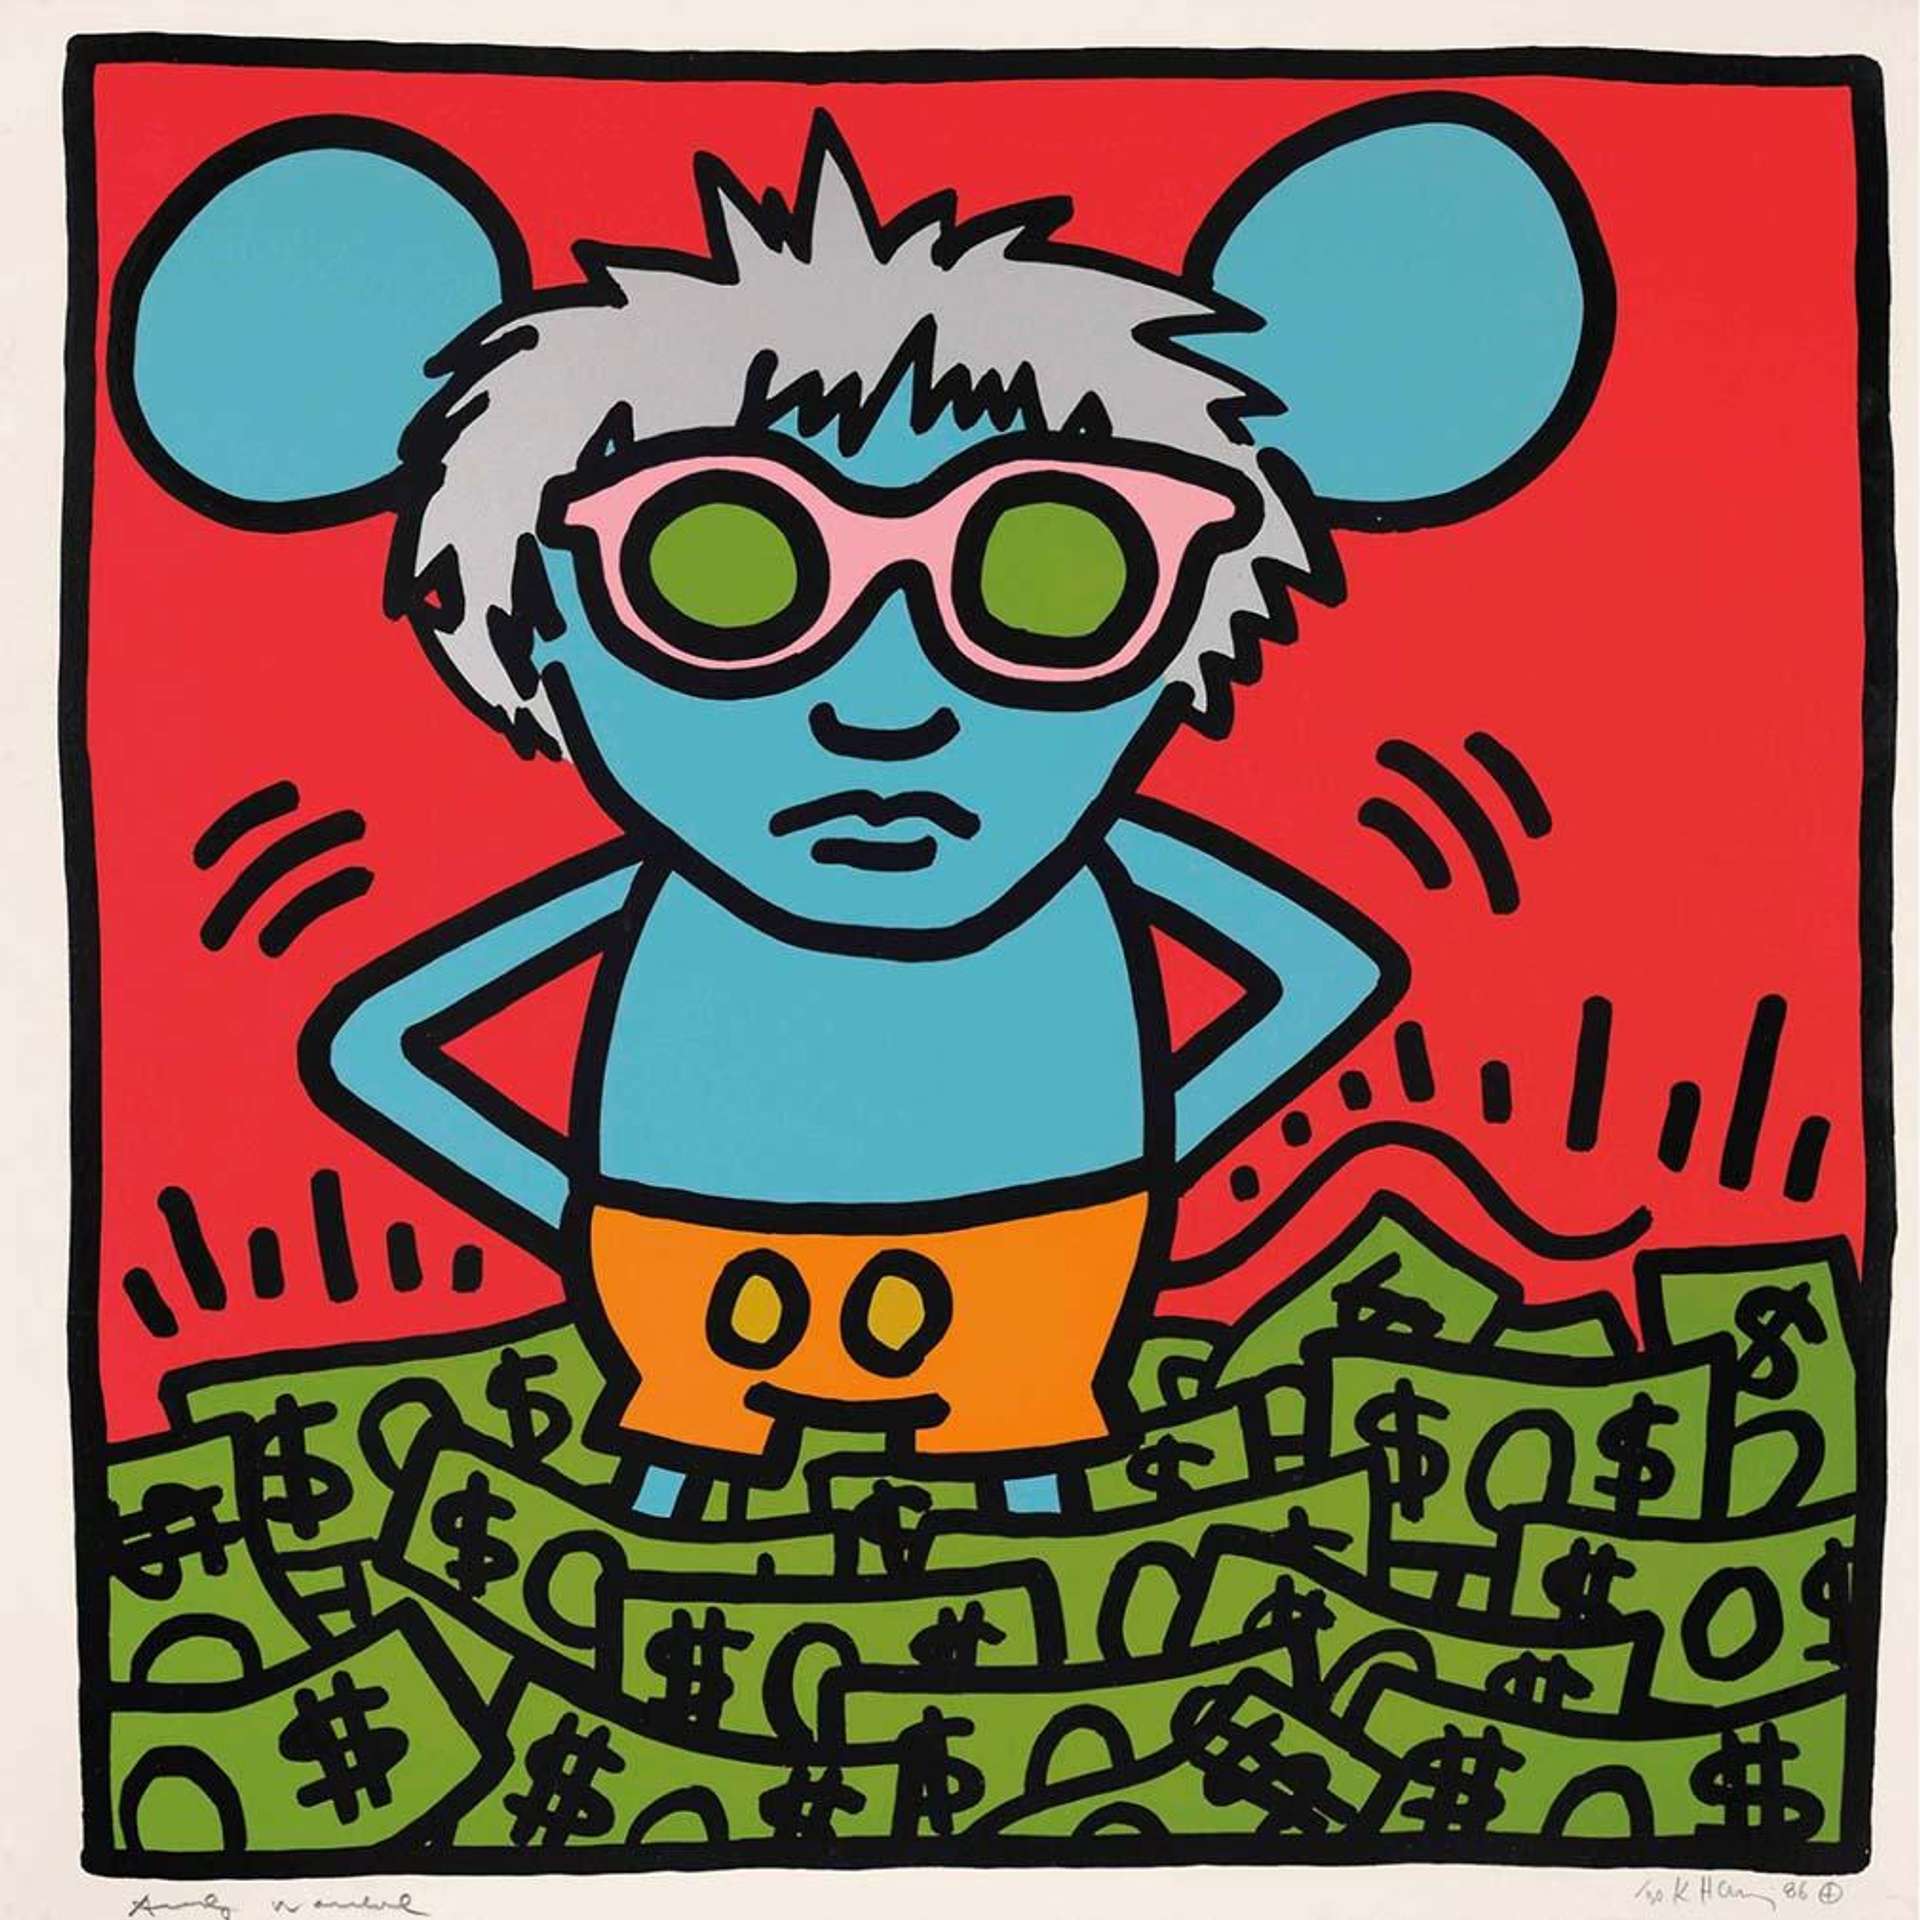 A screenprint by Keith Haring depicting a spiky haired Andy Warhol wearing Mickey Mouse shorts and standing in a sea of dollar bills